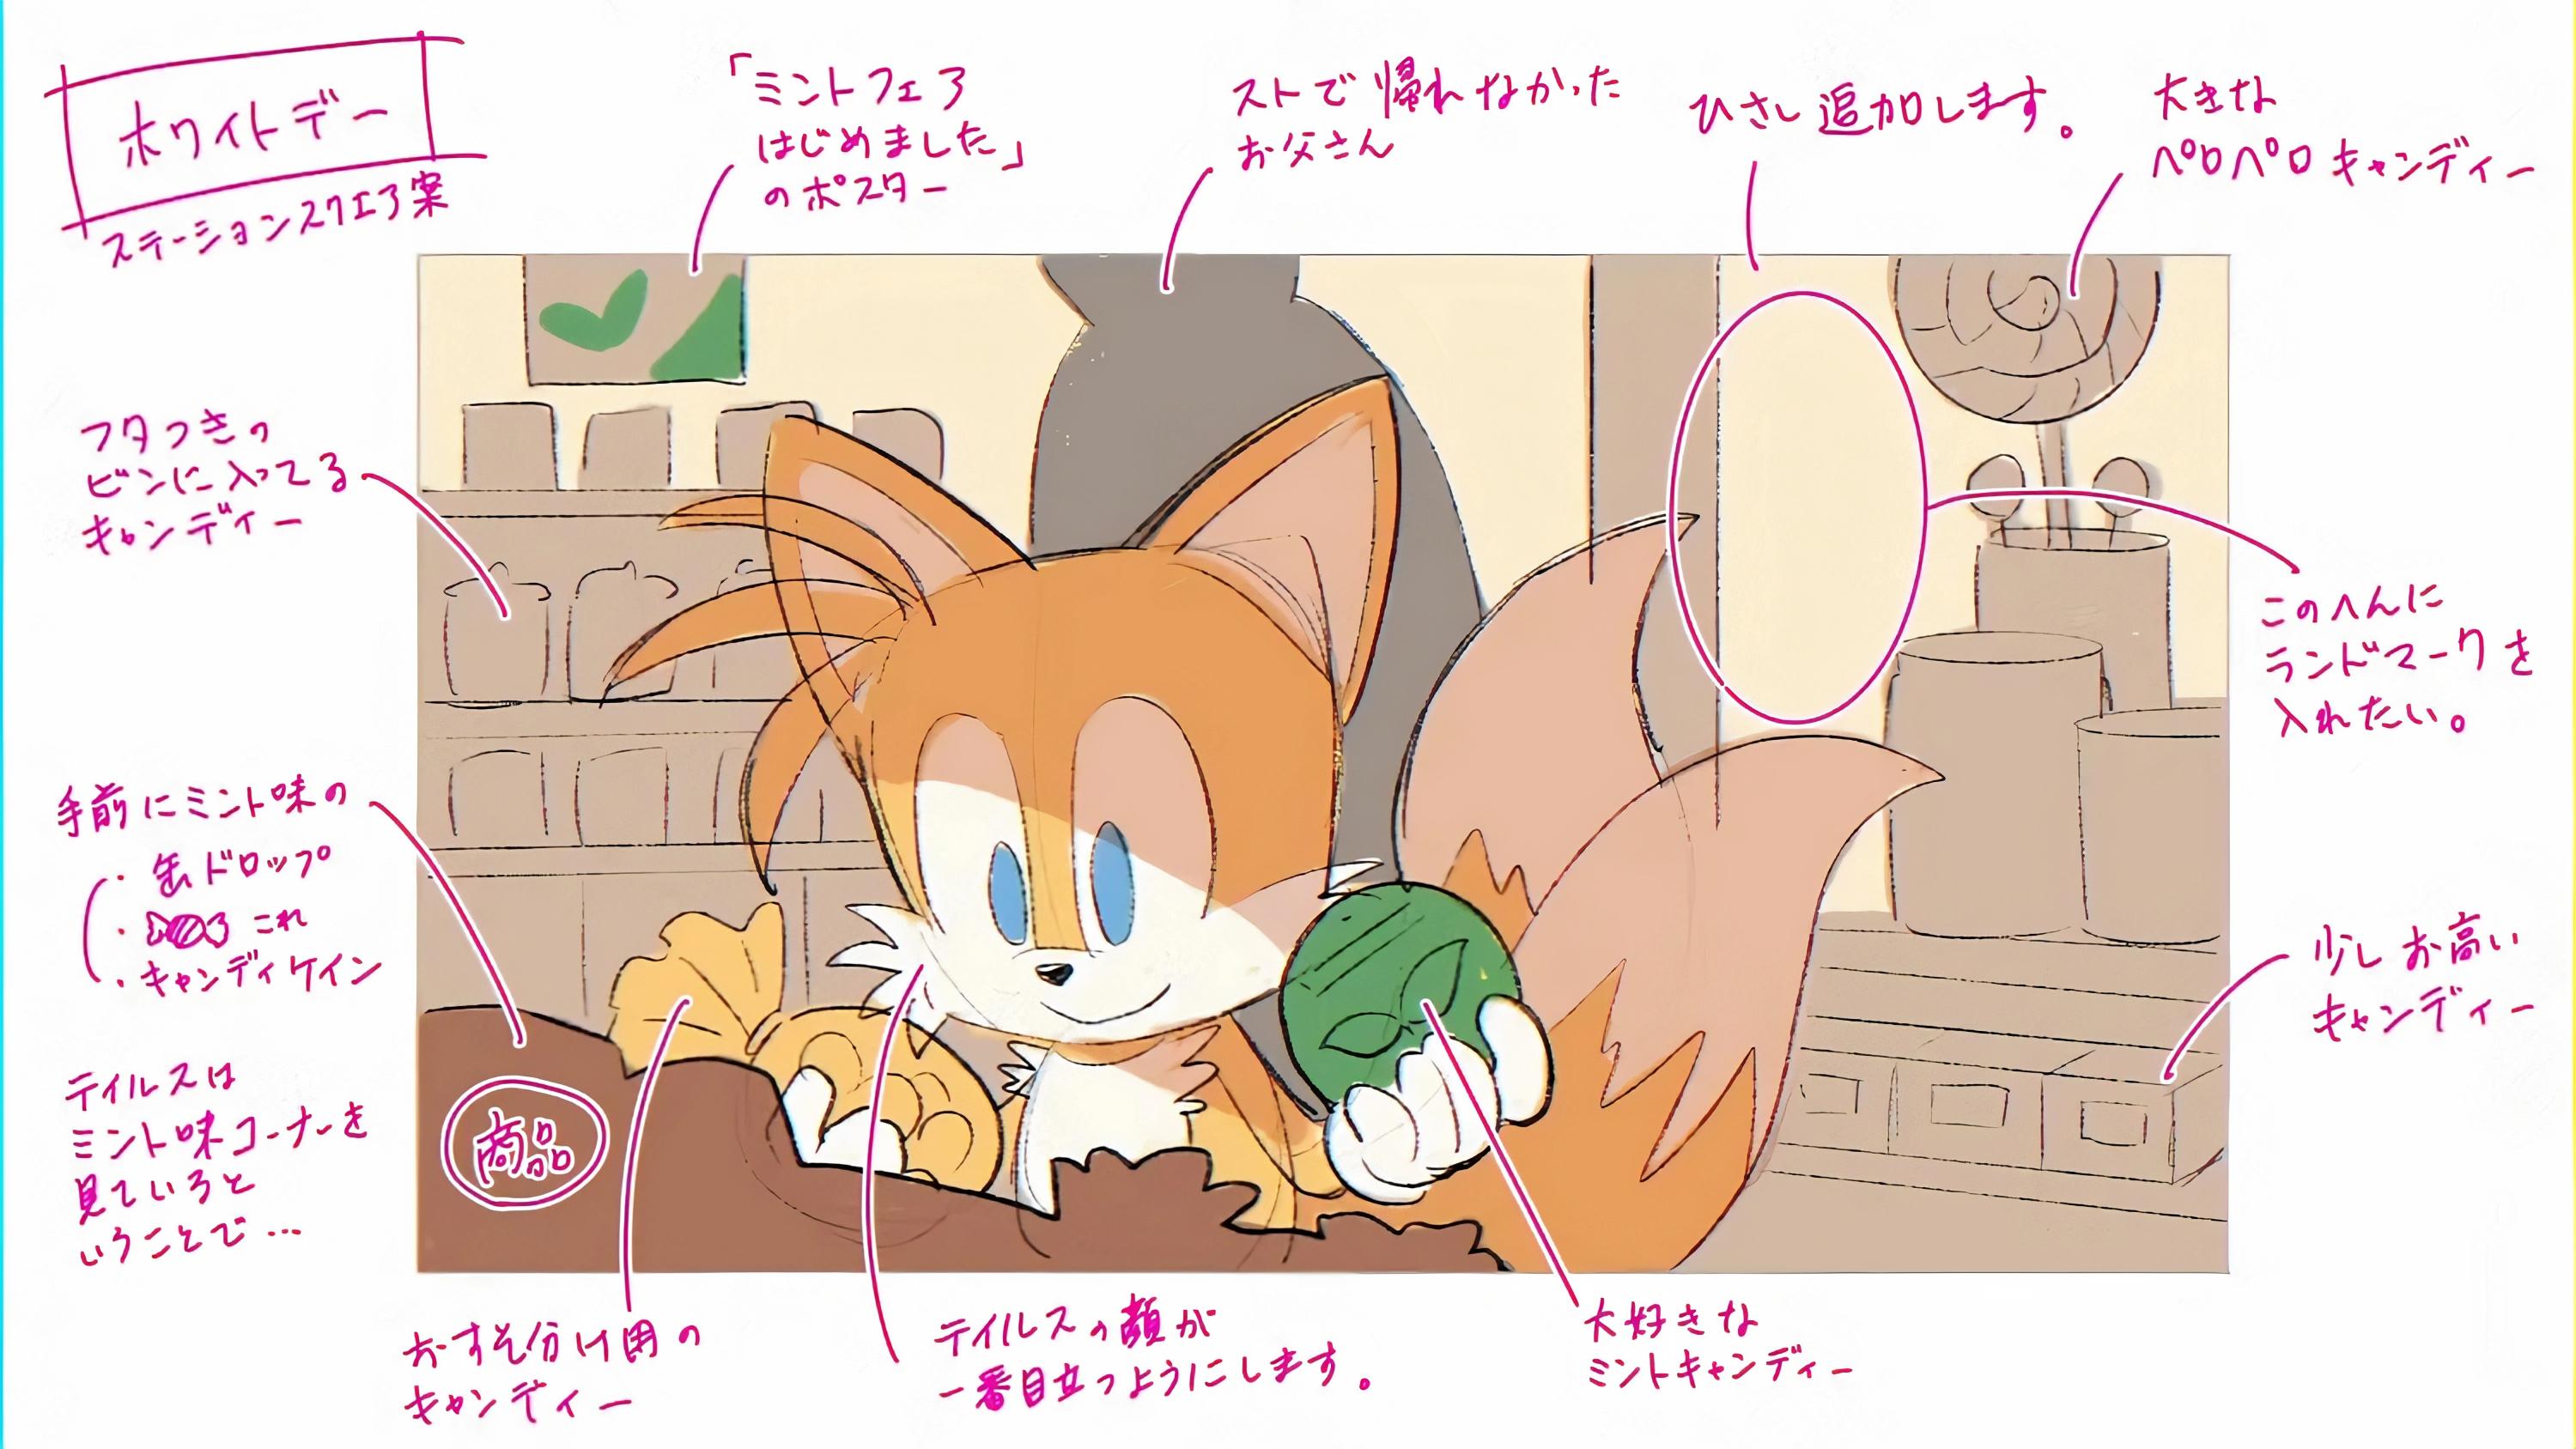 General 3000x1688 Sonic Sonic the Hedgehog Yui Karasuno comic art PC gaming video game art video game characters video games sketches sketchup Tails (character) mint fox lollipop stores shopping Sega Japanese artwork